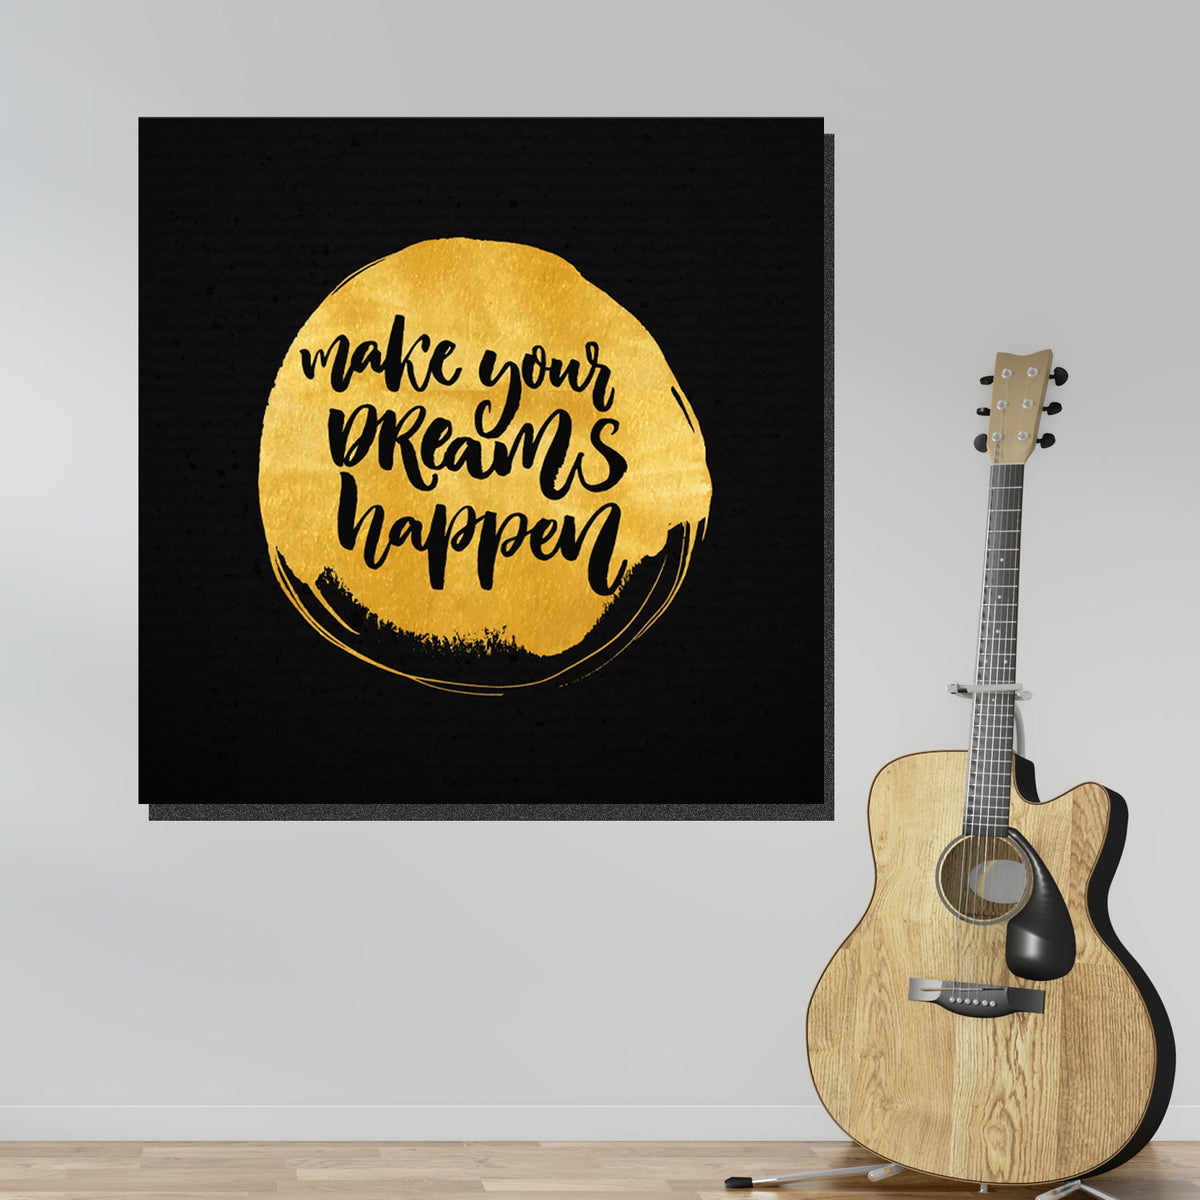 https://cdn.shopify.com/s/files/1/0387/9986/8044/products/MakeyourDreamHappenCanvasArtprintStretched-3.jpg